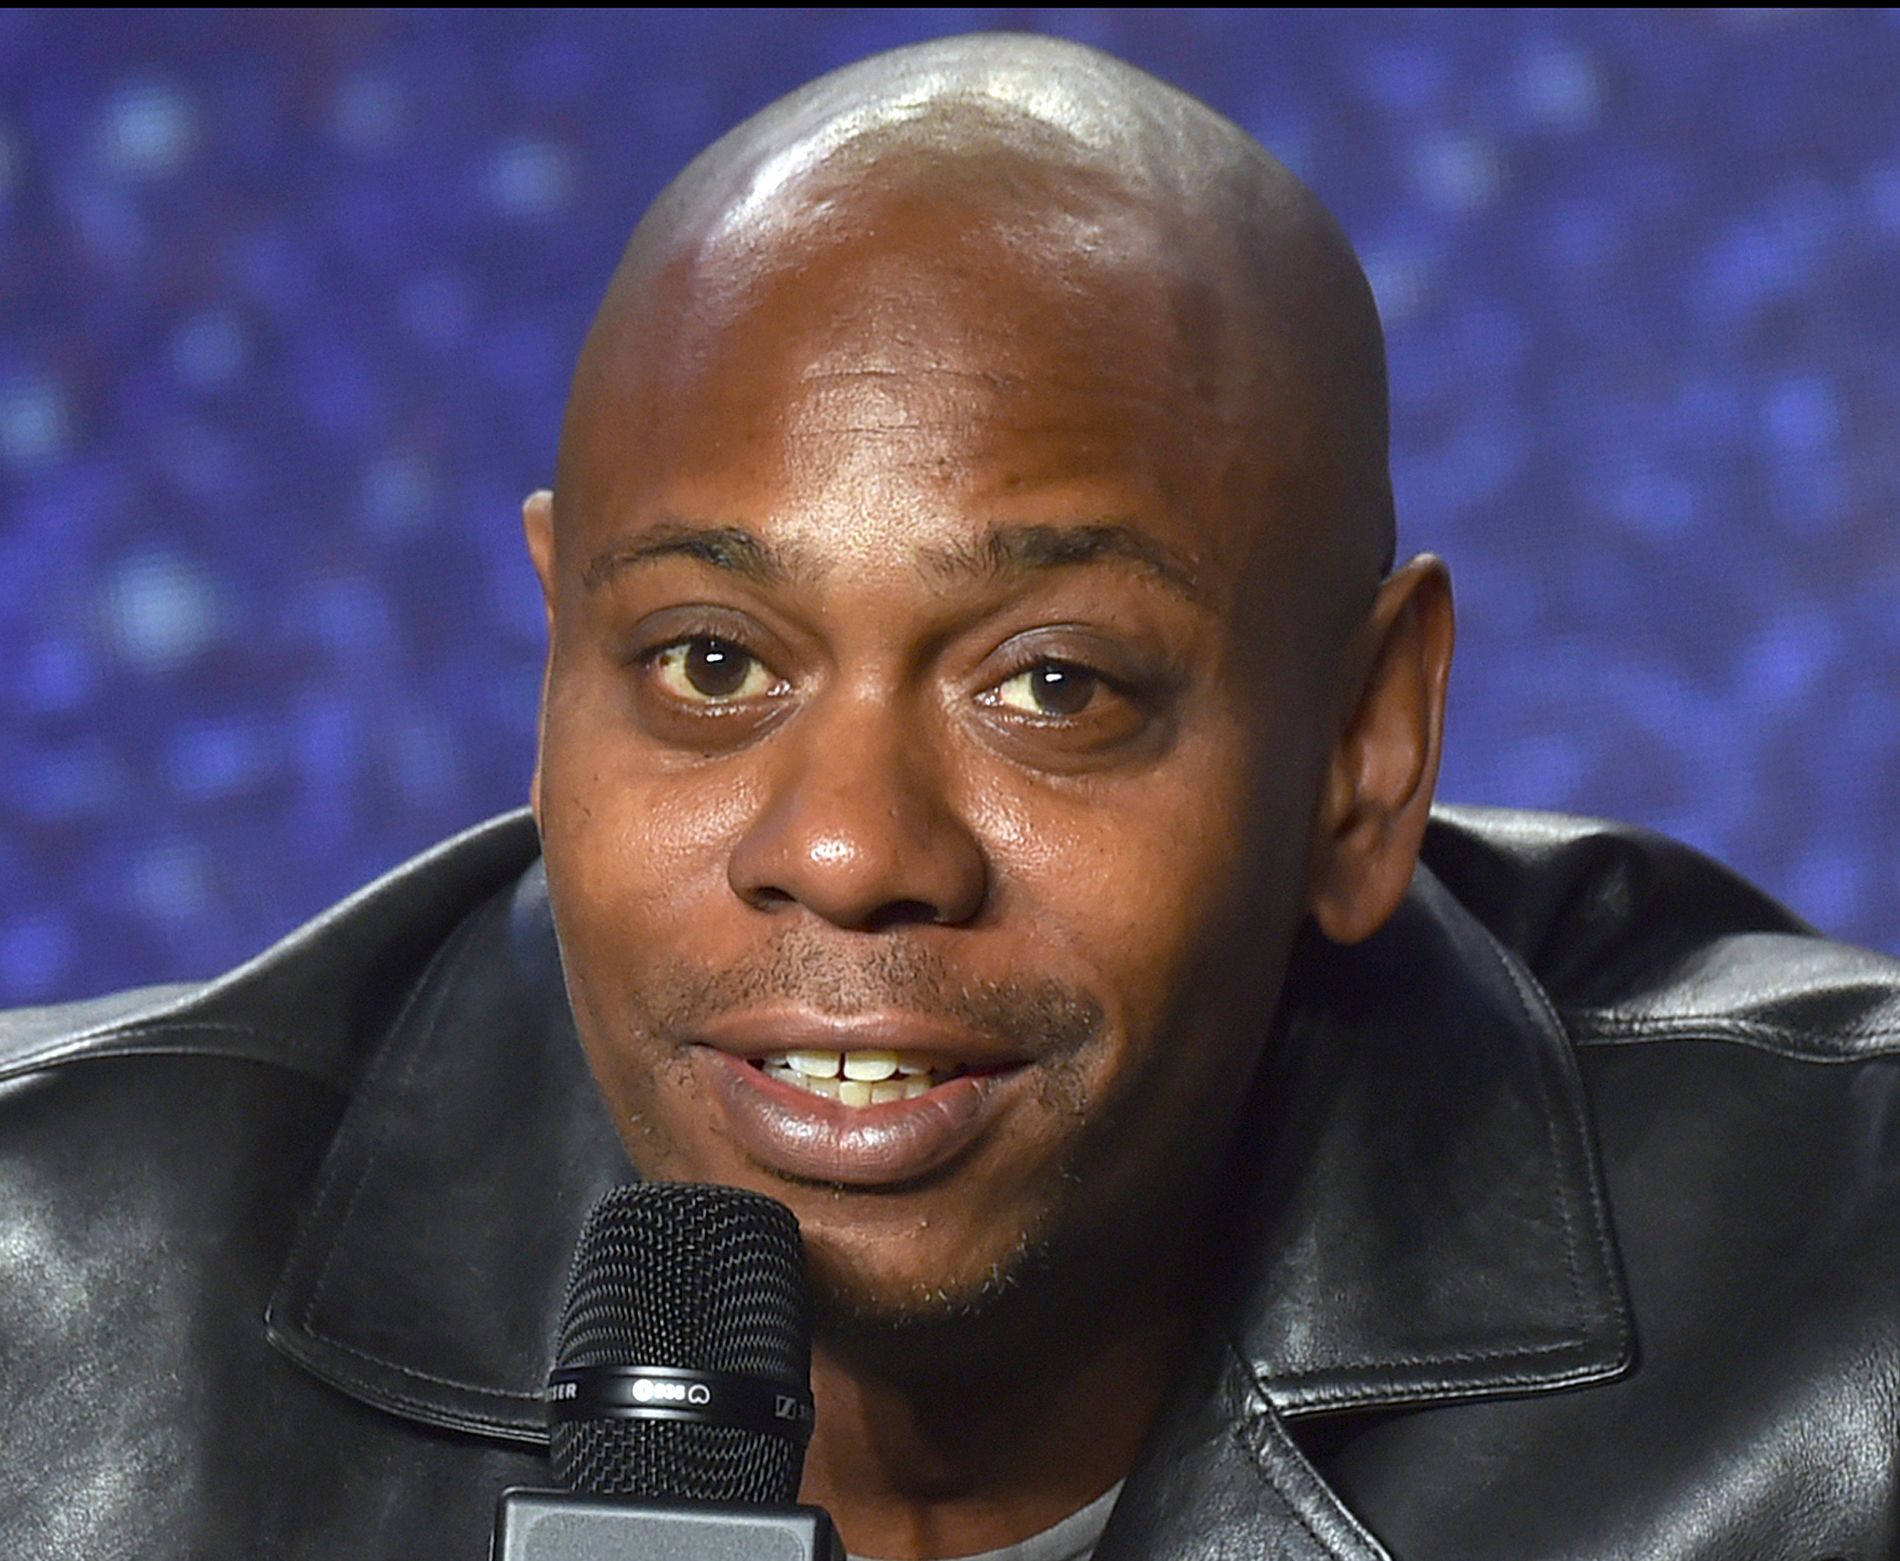 Dave Chappelle addresses the passing environment and feedback: